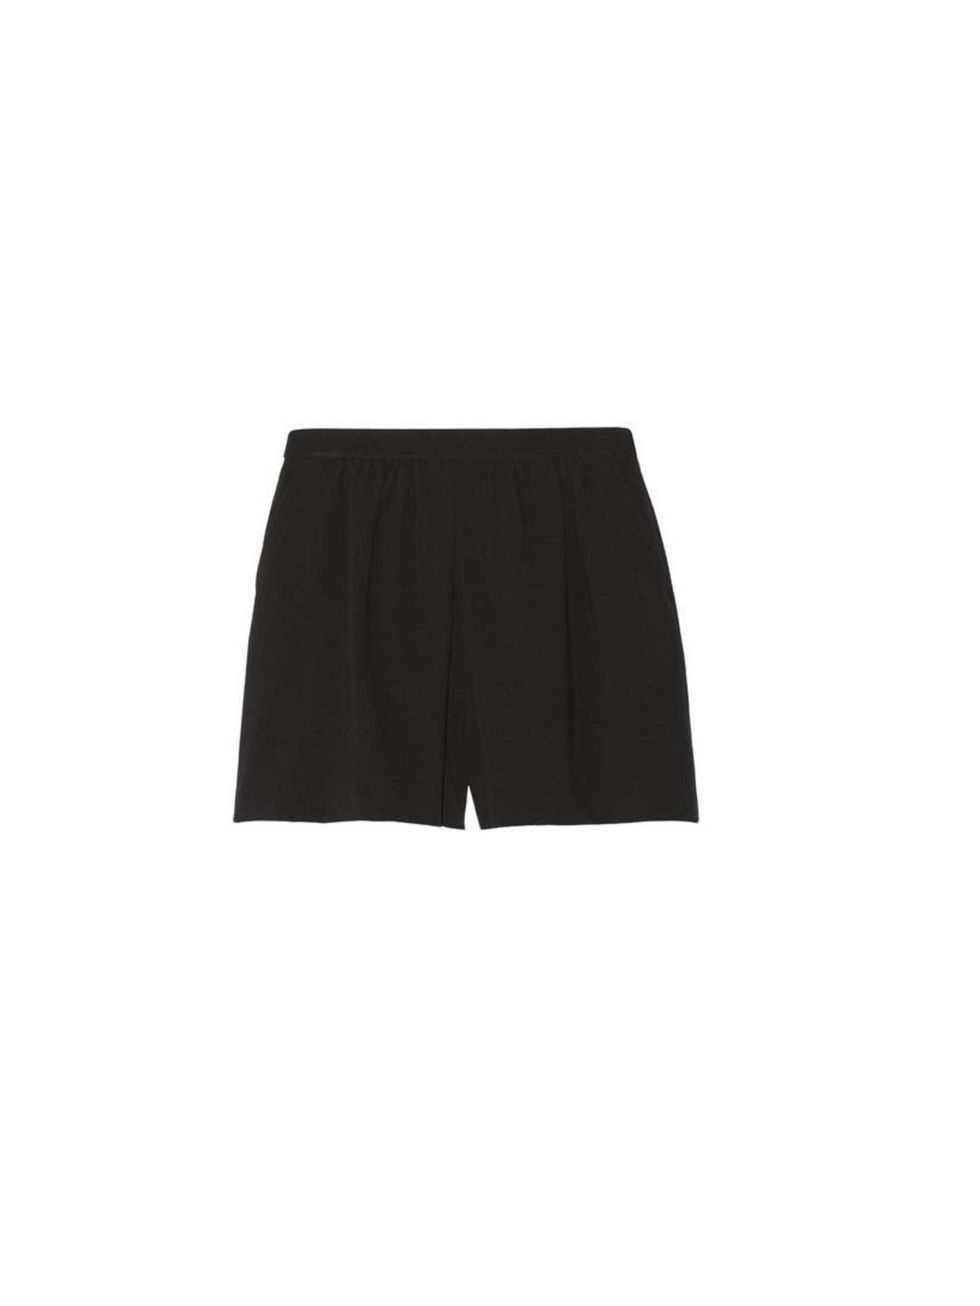 Tibi shorts, £260 available at Net-a-porter